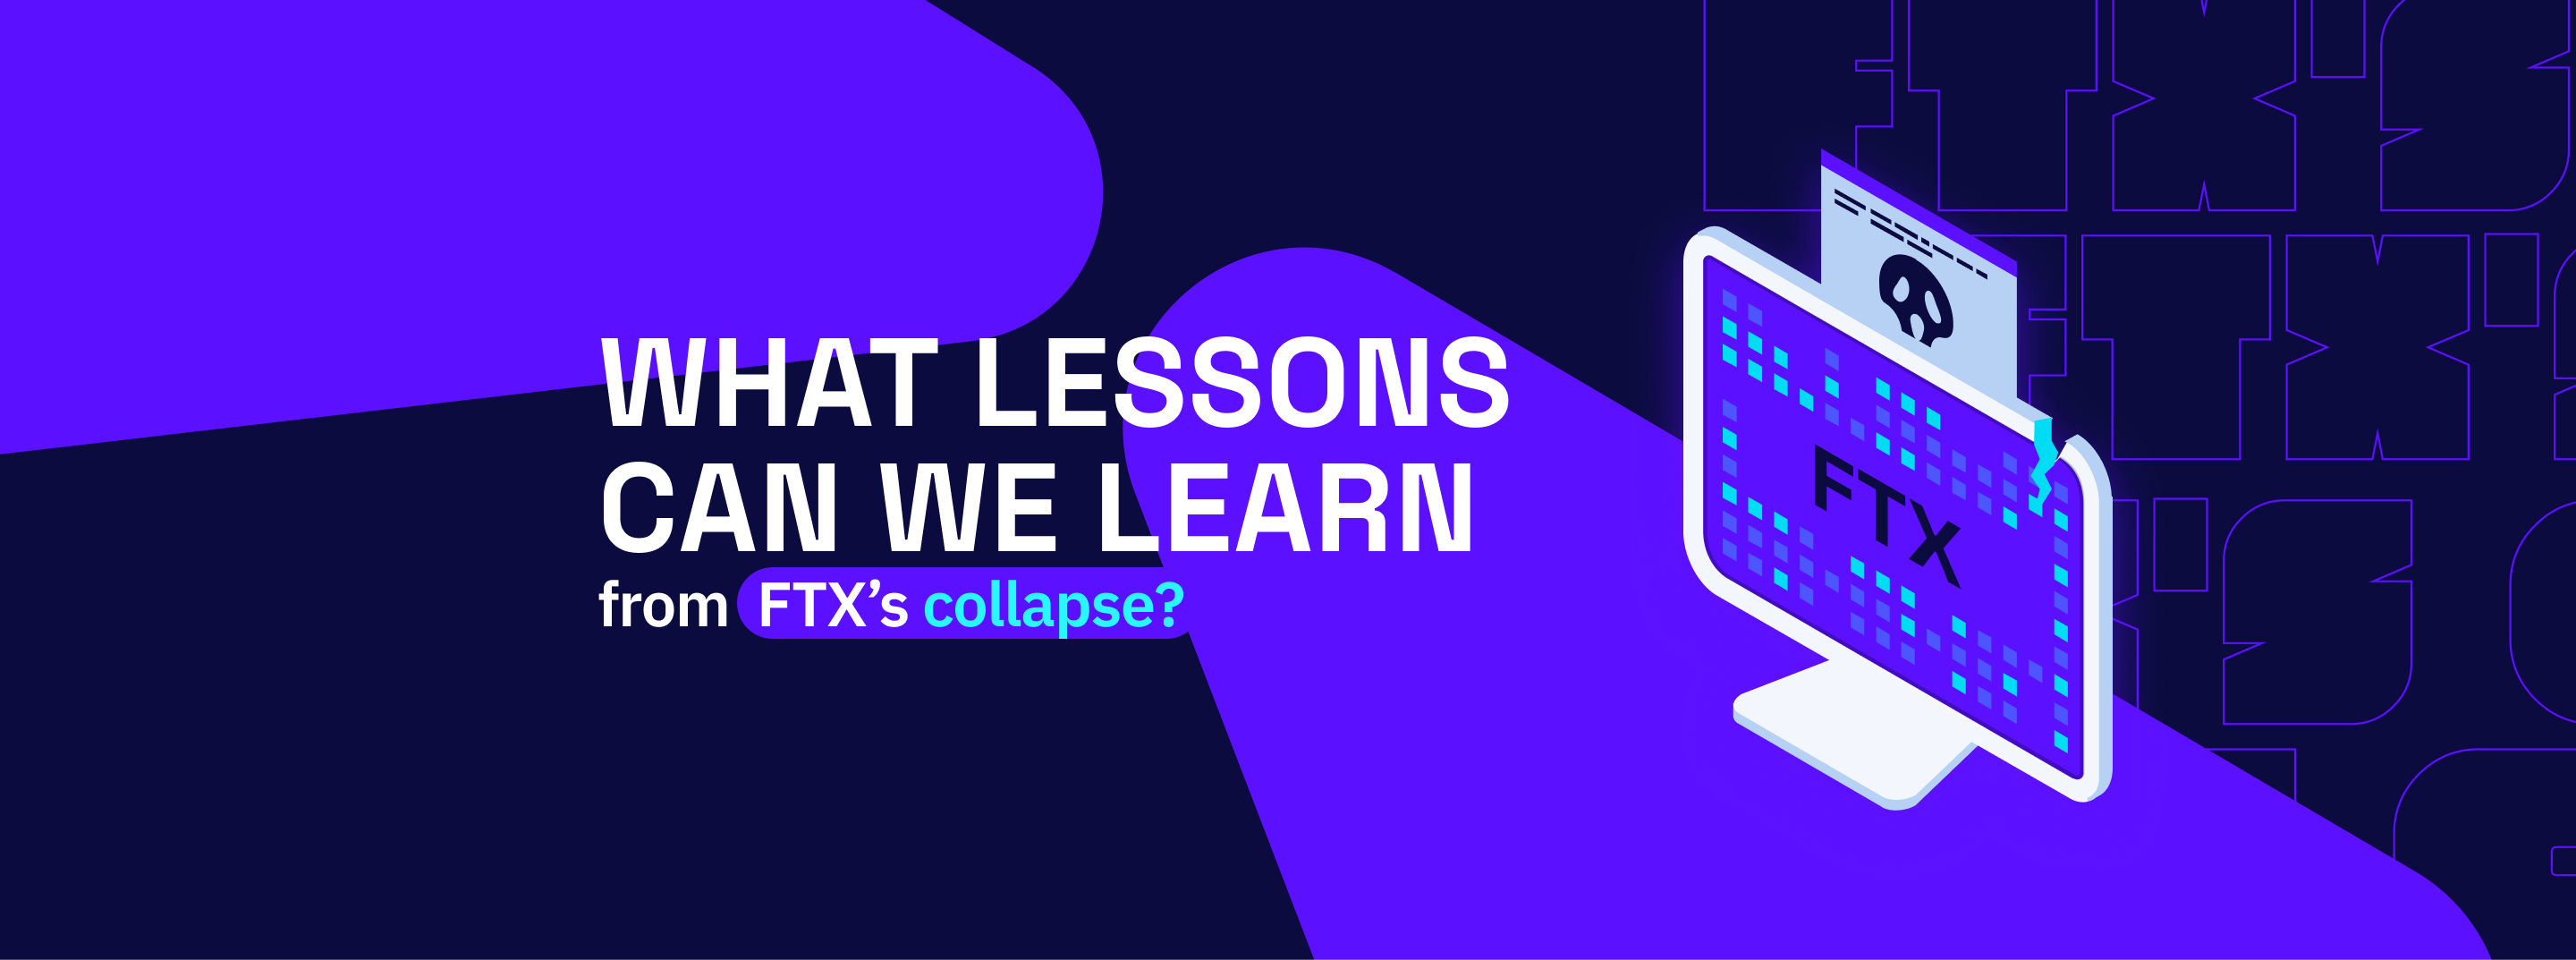 WHAT LESSONS CAN WE LEARN FROM FTX'S COLLAPSE? Here’s What Industry Experts Have Said So Far.